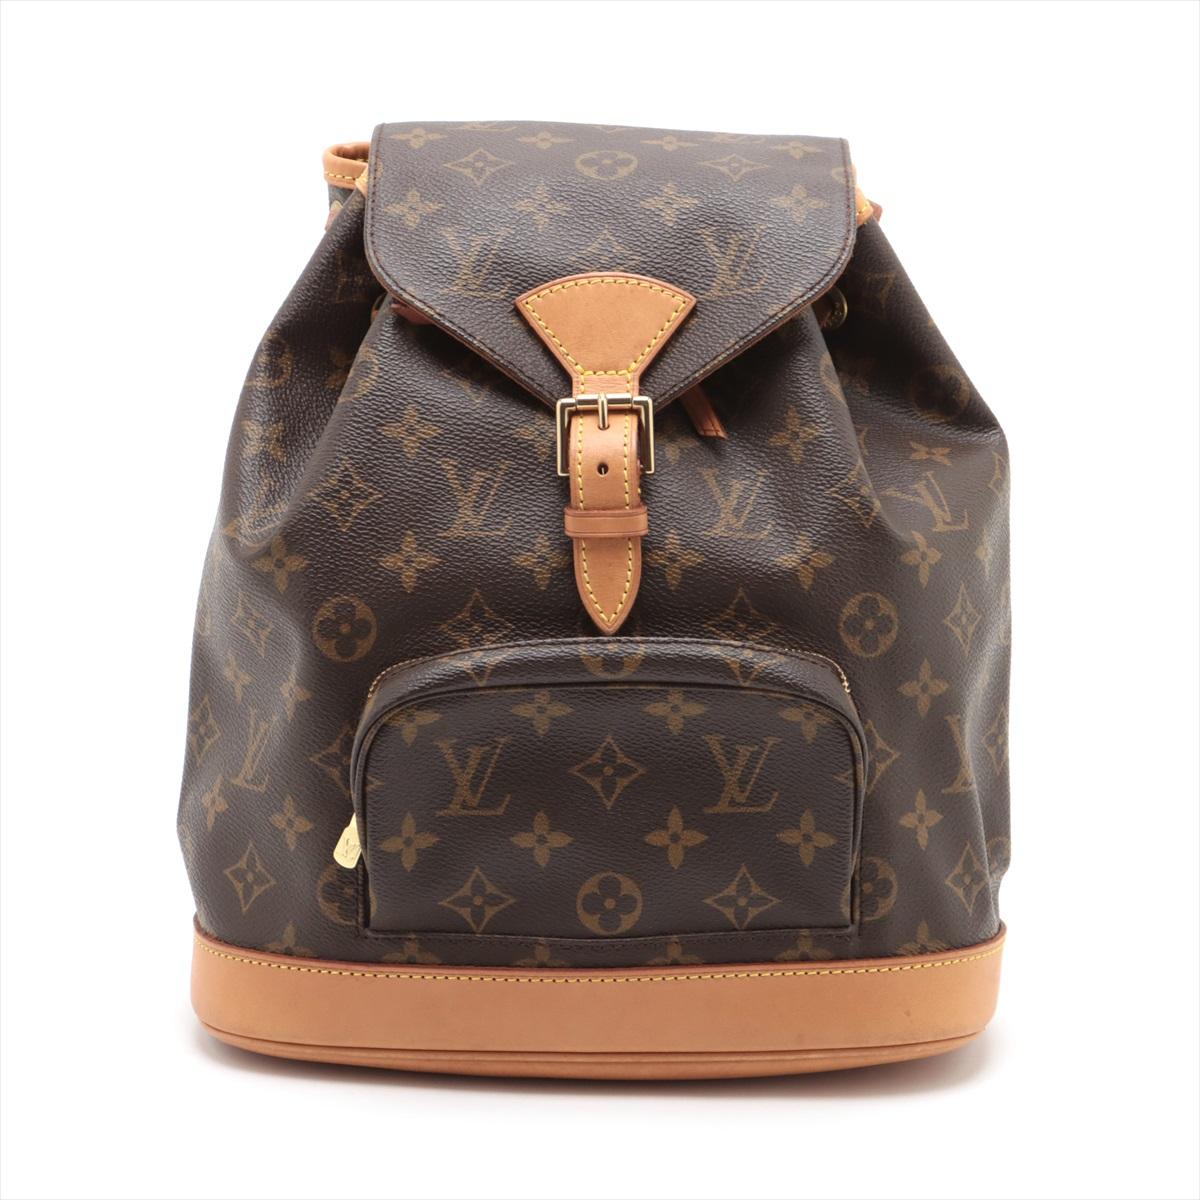 The Louis Vuitton Monogram Montsouris MM backpack is an iconic piece that seamlessly combines style and functionality. Crafted from the brand's signature monogram canvas, the backpack exudes luxury and sophistication. The vachetta leather trims